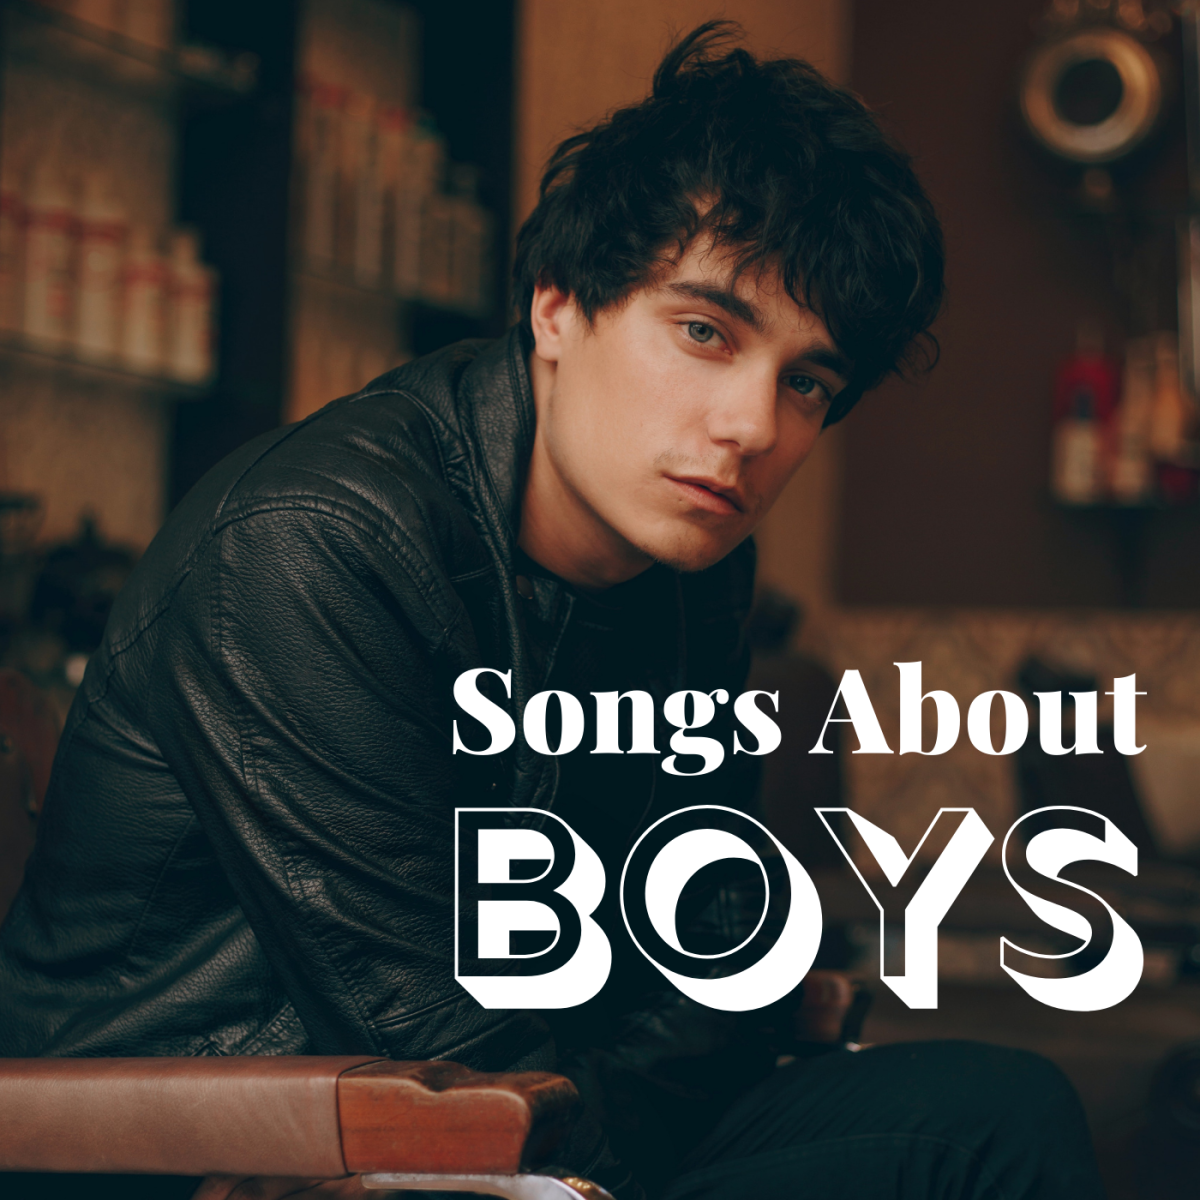 100 Best Songs With “Boy” in the Title